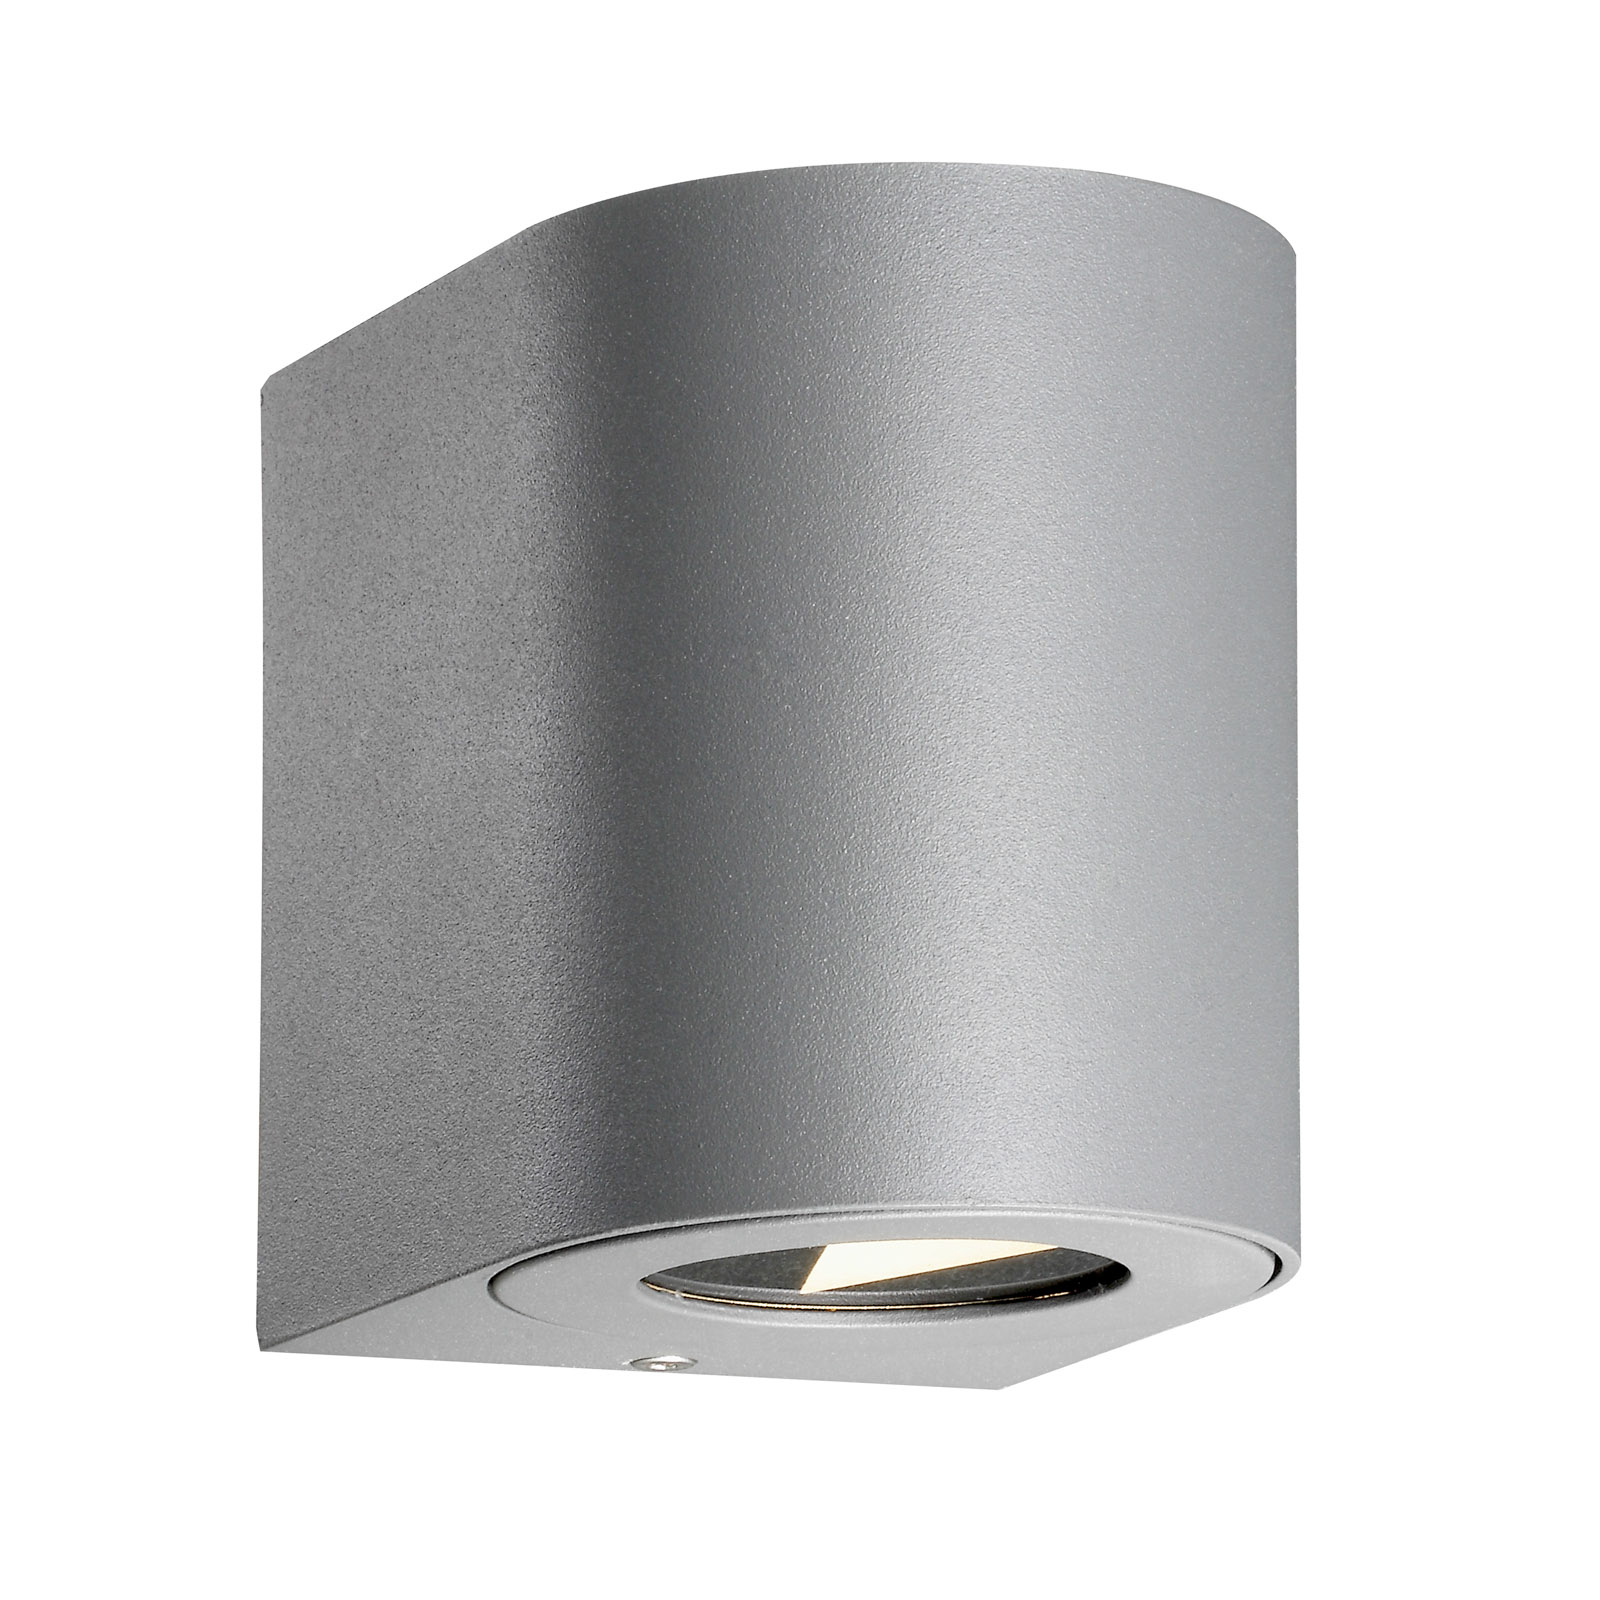 Canto 2 LED outdoor wall light, 10 cm, grey